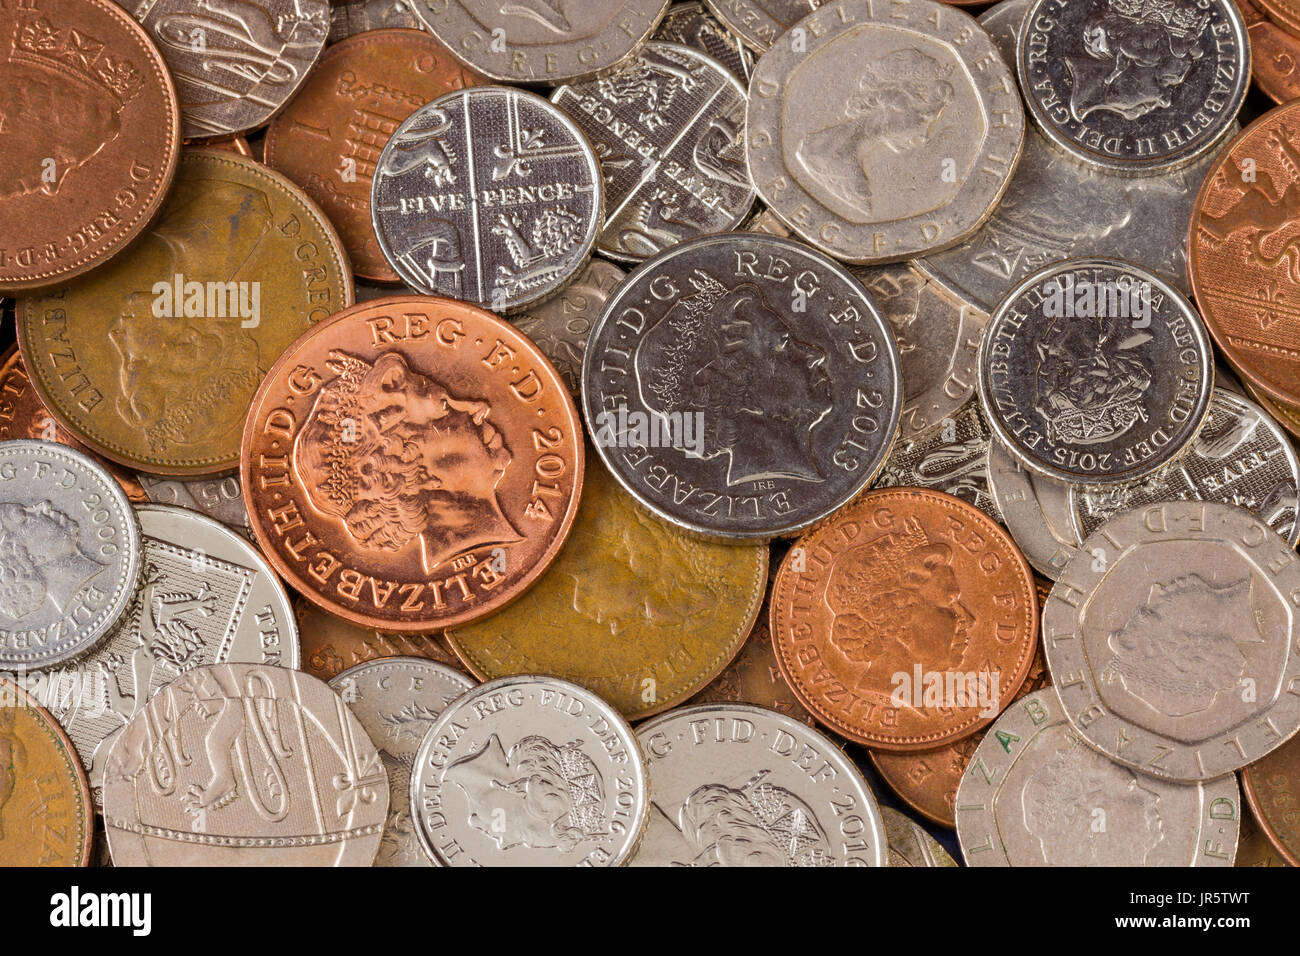 British English sterling coins selection, UK currency Stock Photo